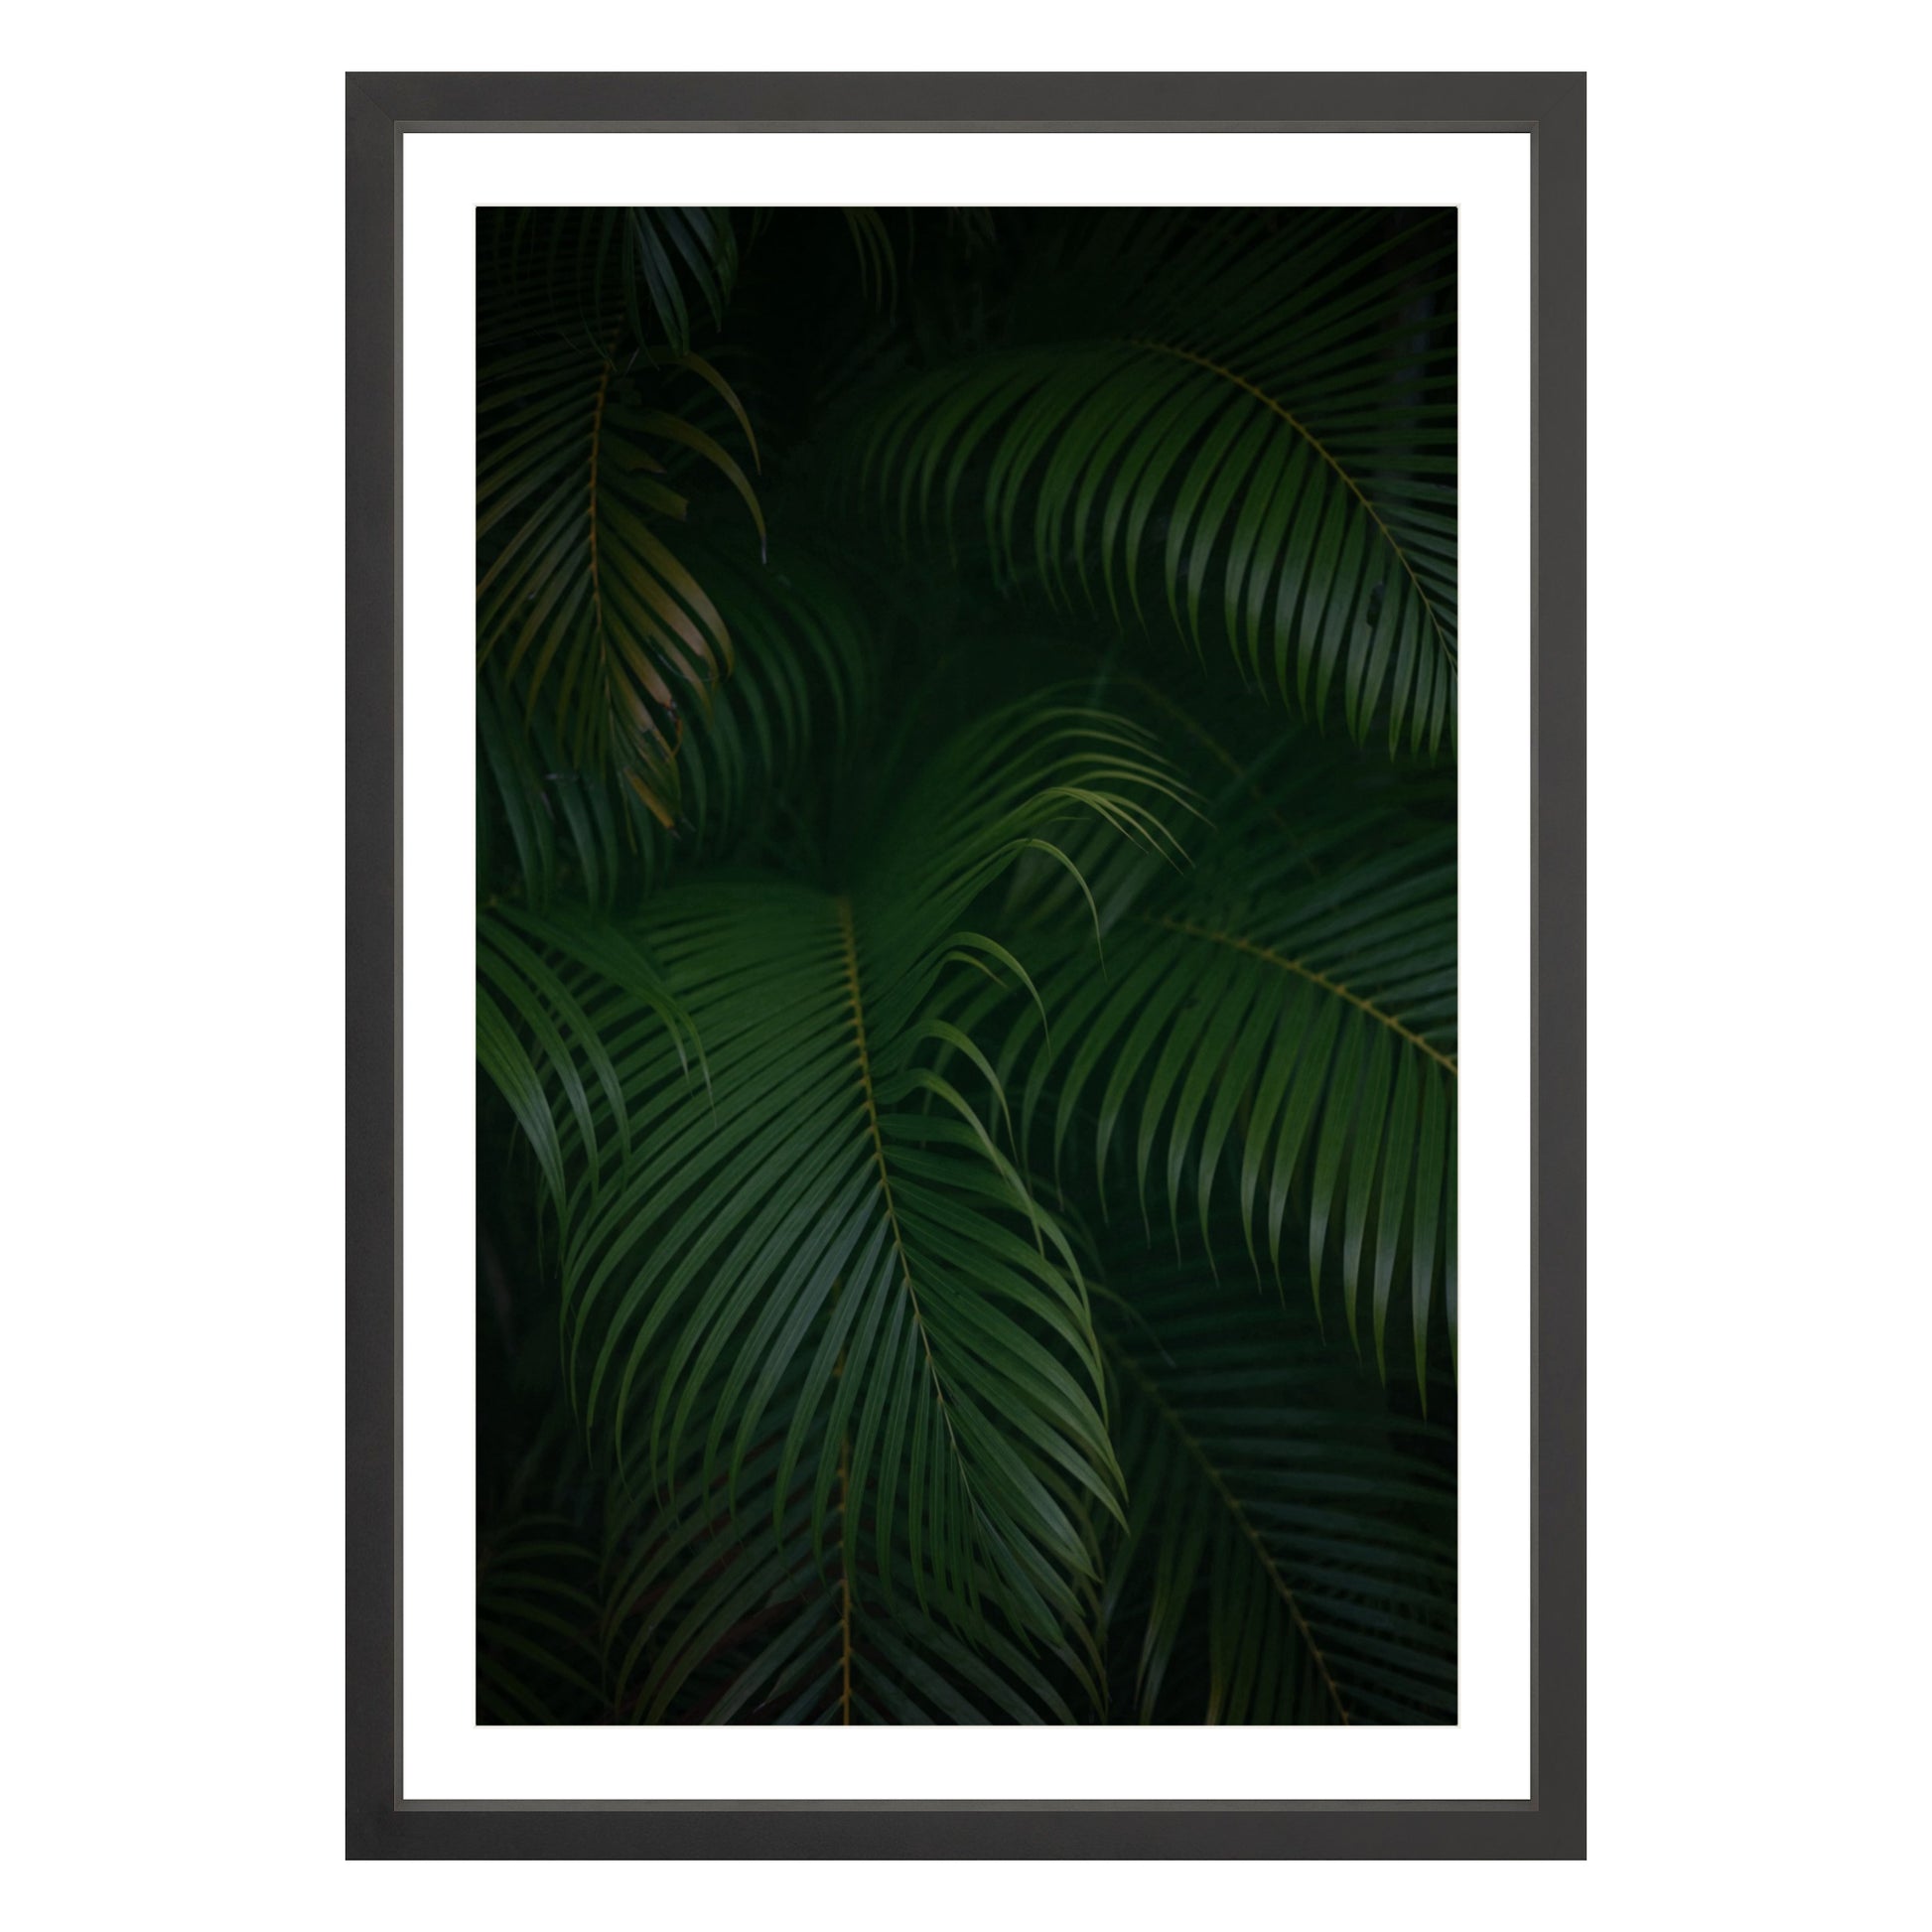 Photograph of palm branches at night in a black wood frame with white mat